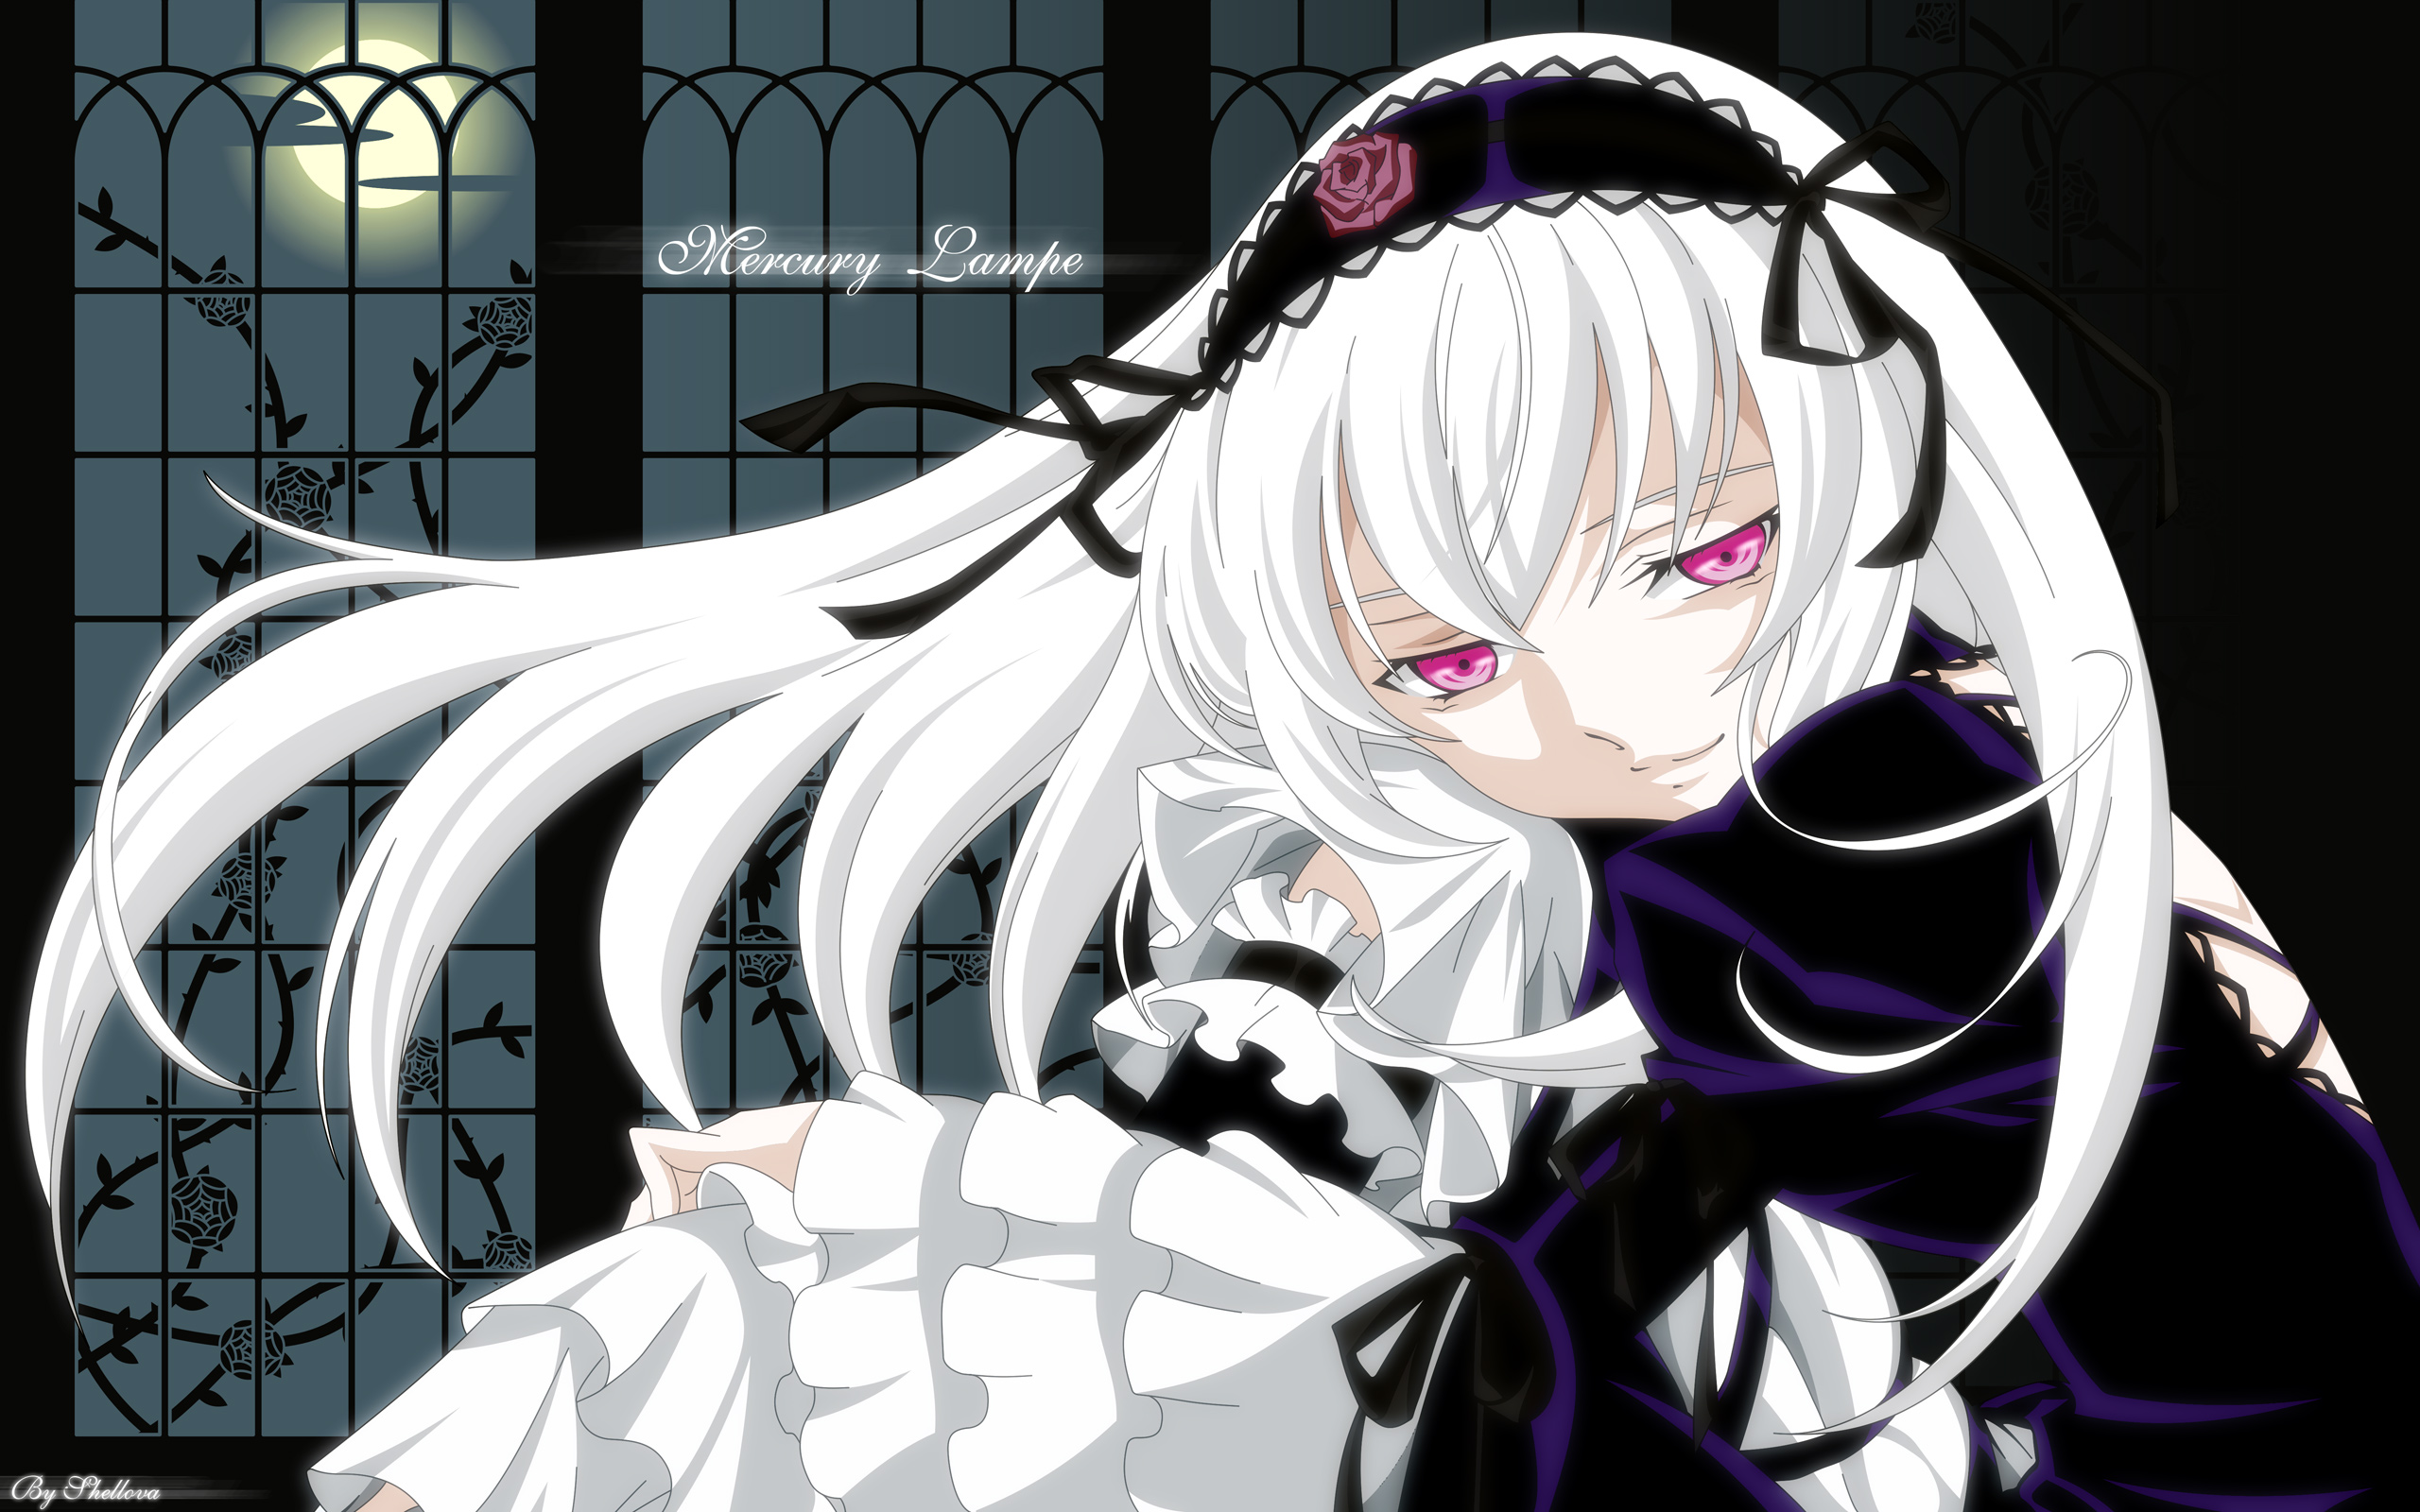 Rozen Maiden Anime Wallpaper with detailed artwork and vibrant colors.